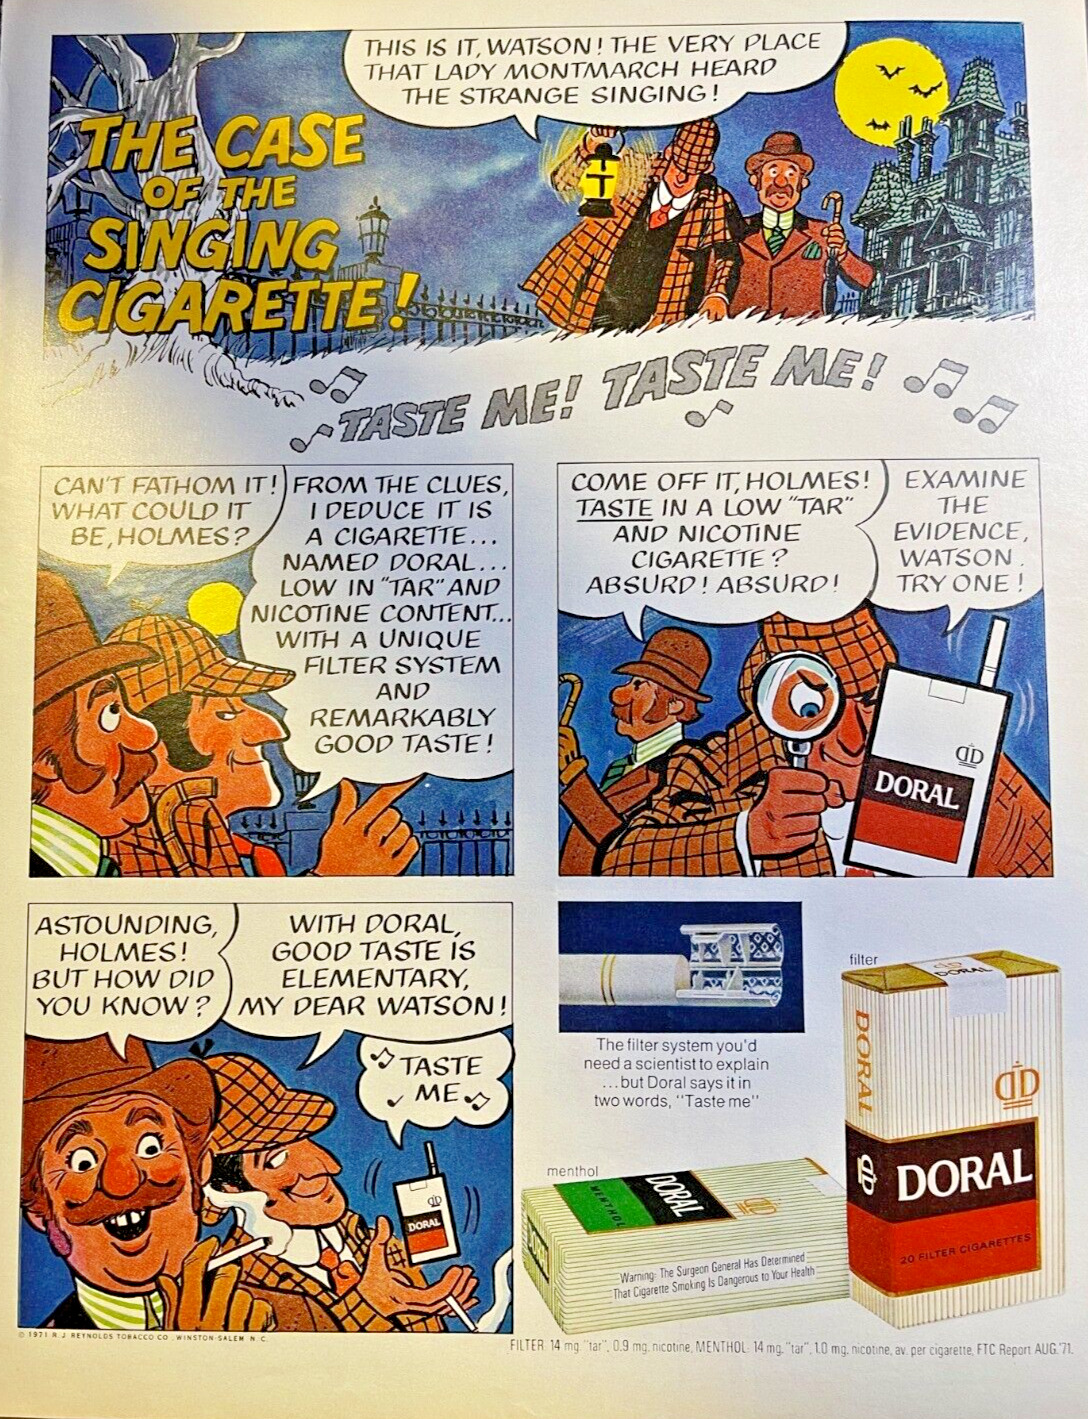 Magazine Advertisement 1972 Doral The Case of the Singing Cigarette